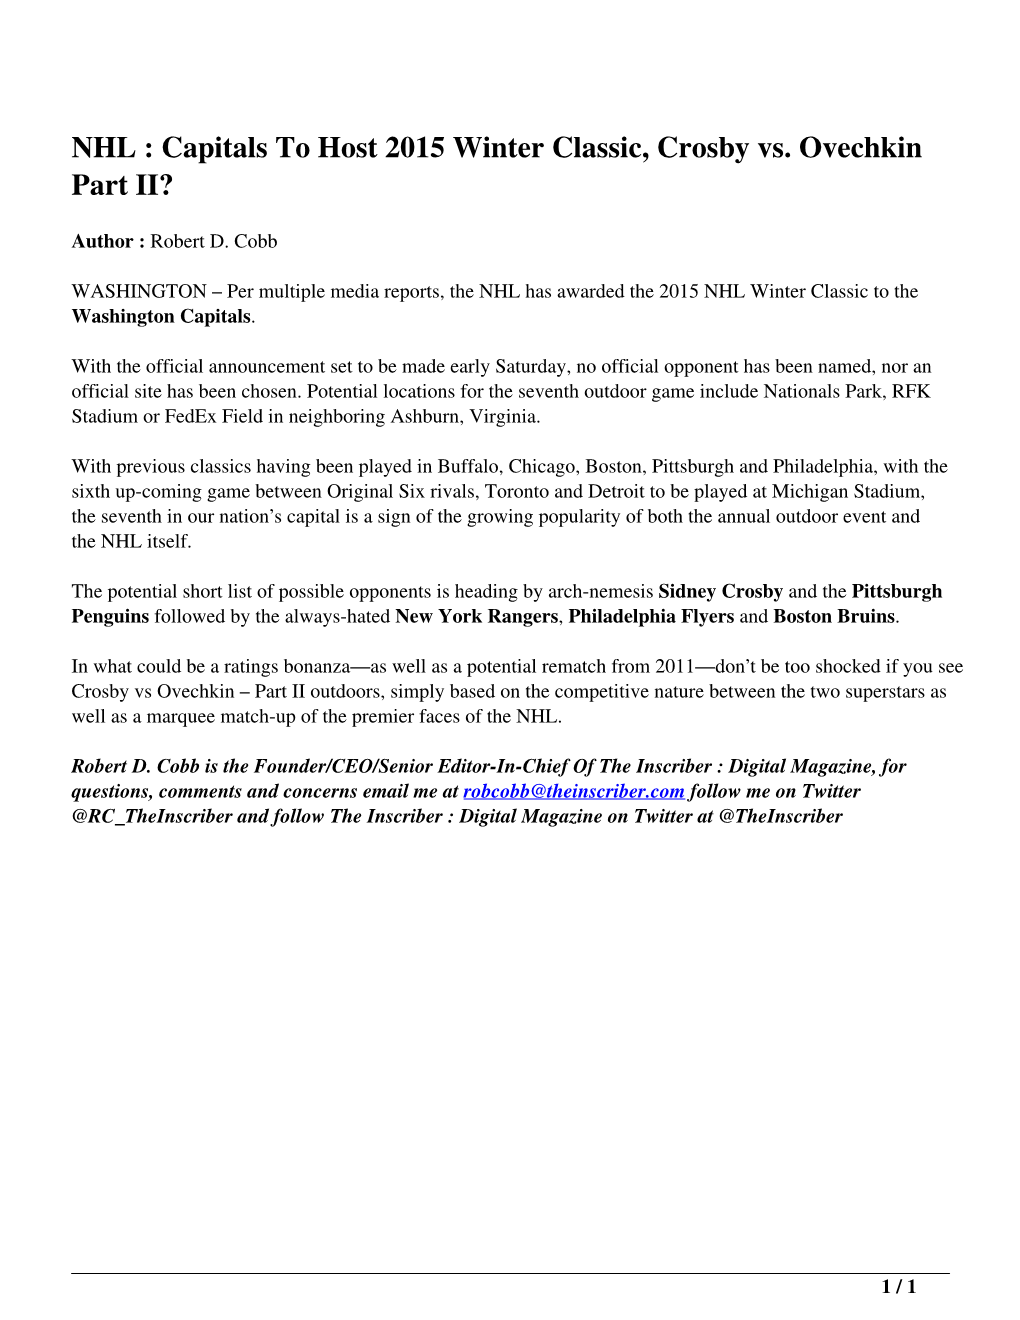 NHL : Capitals to Host 2015 Winter Classic, Crosby Vs. Ovechkin Part II?